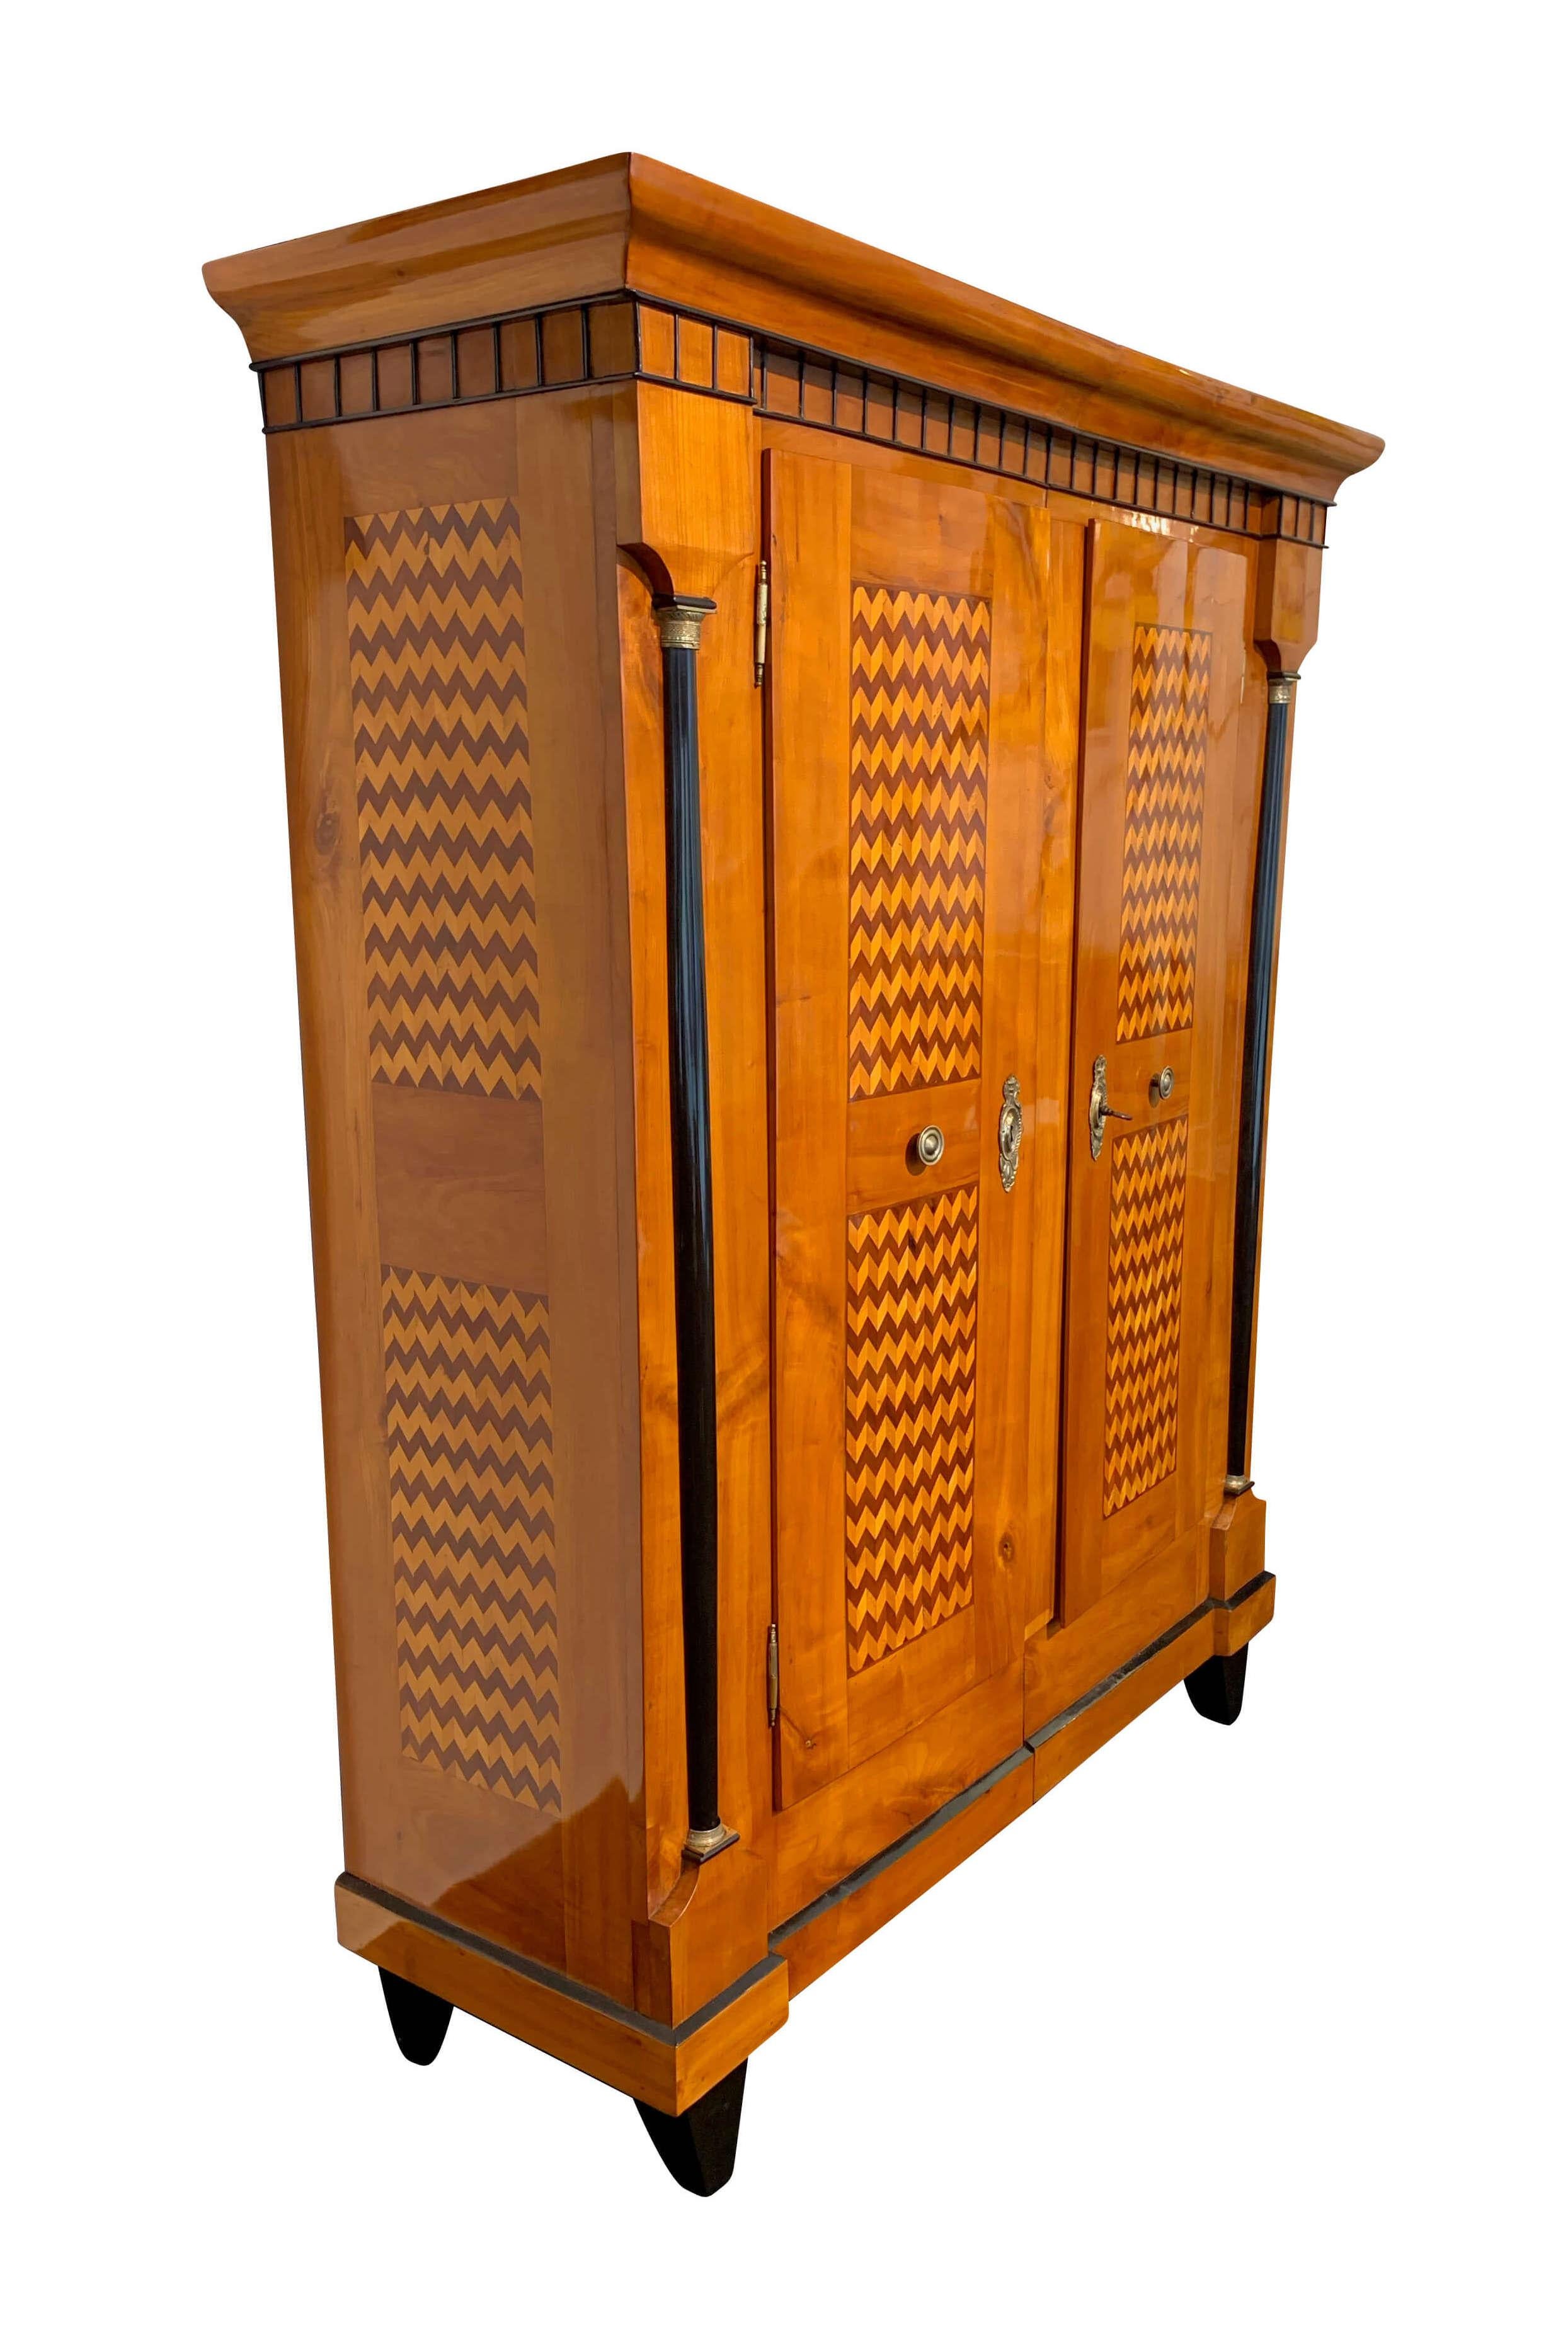 Wonderful original Biedermeier armoire or wardrobe from Lake Constance Area, South Germany, circa 1820.

Amazing bright and friendly cherry veneer and elaborate plum and maple inlay band at the front and sides. 
Ebonized half-columns with